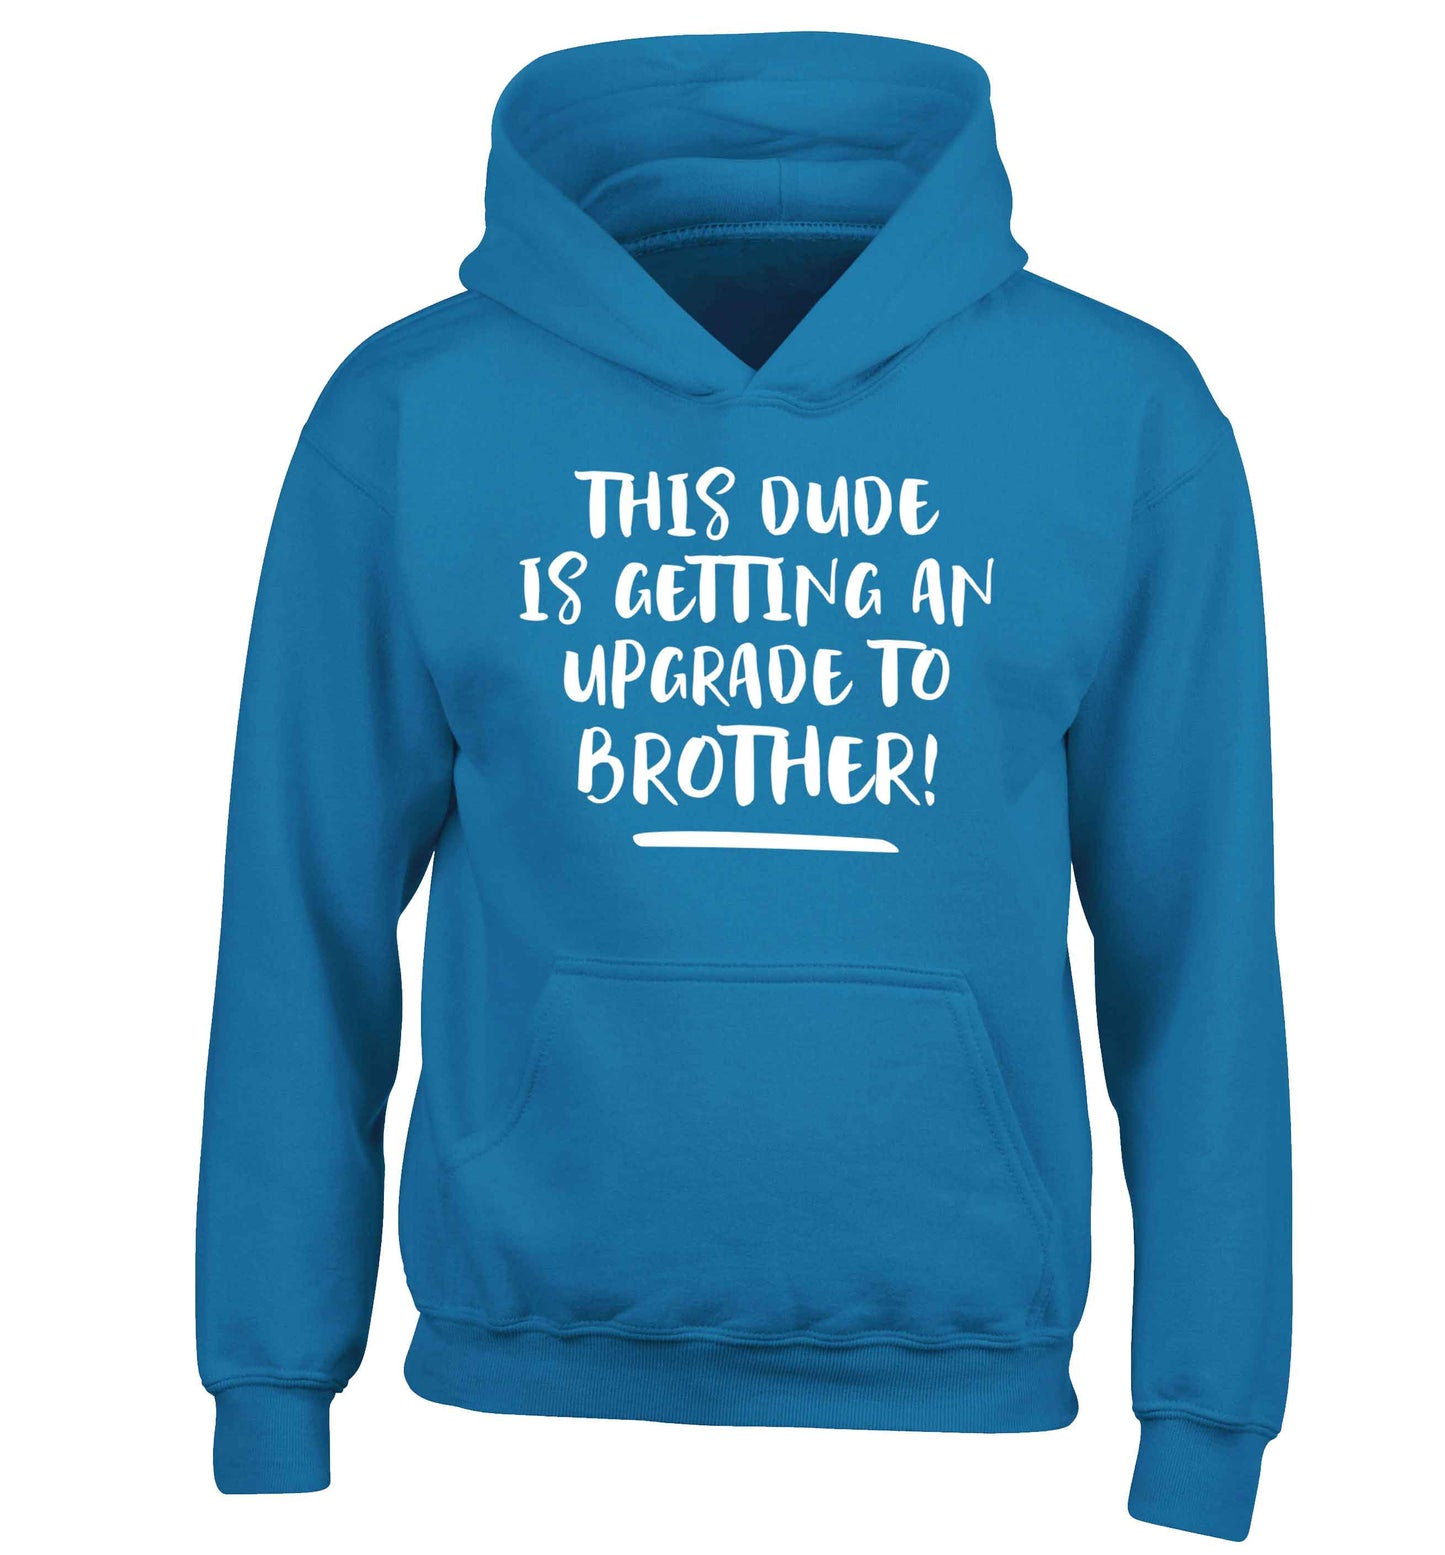 This dude is getting an upgrade to brother! children's blue hoodie 12-13 Years